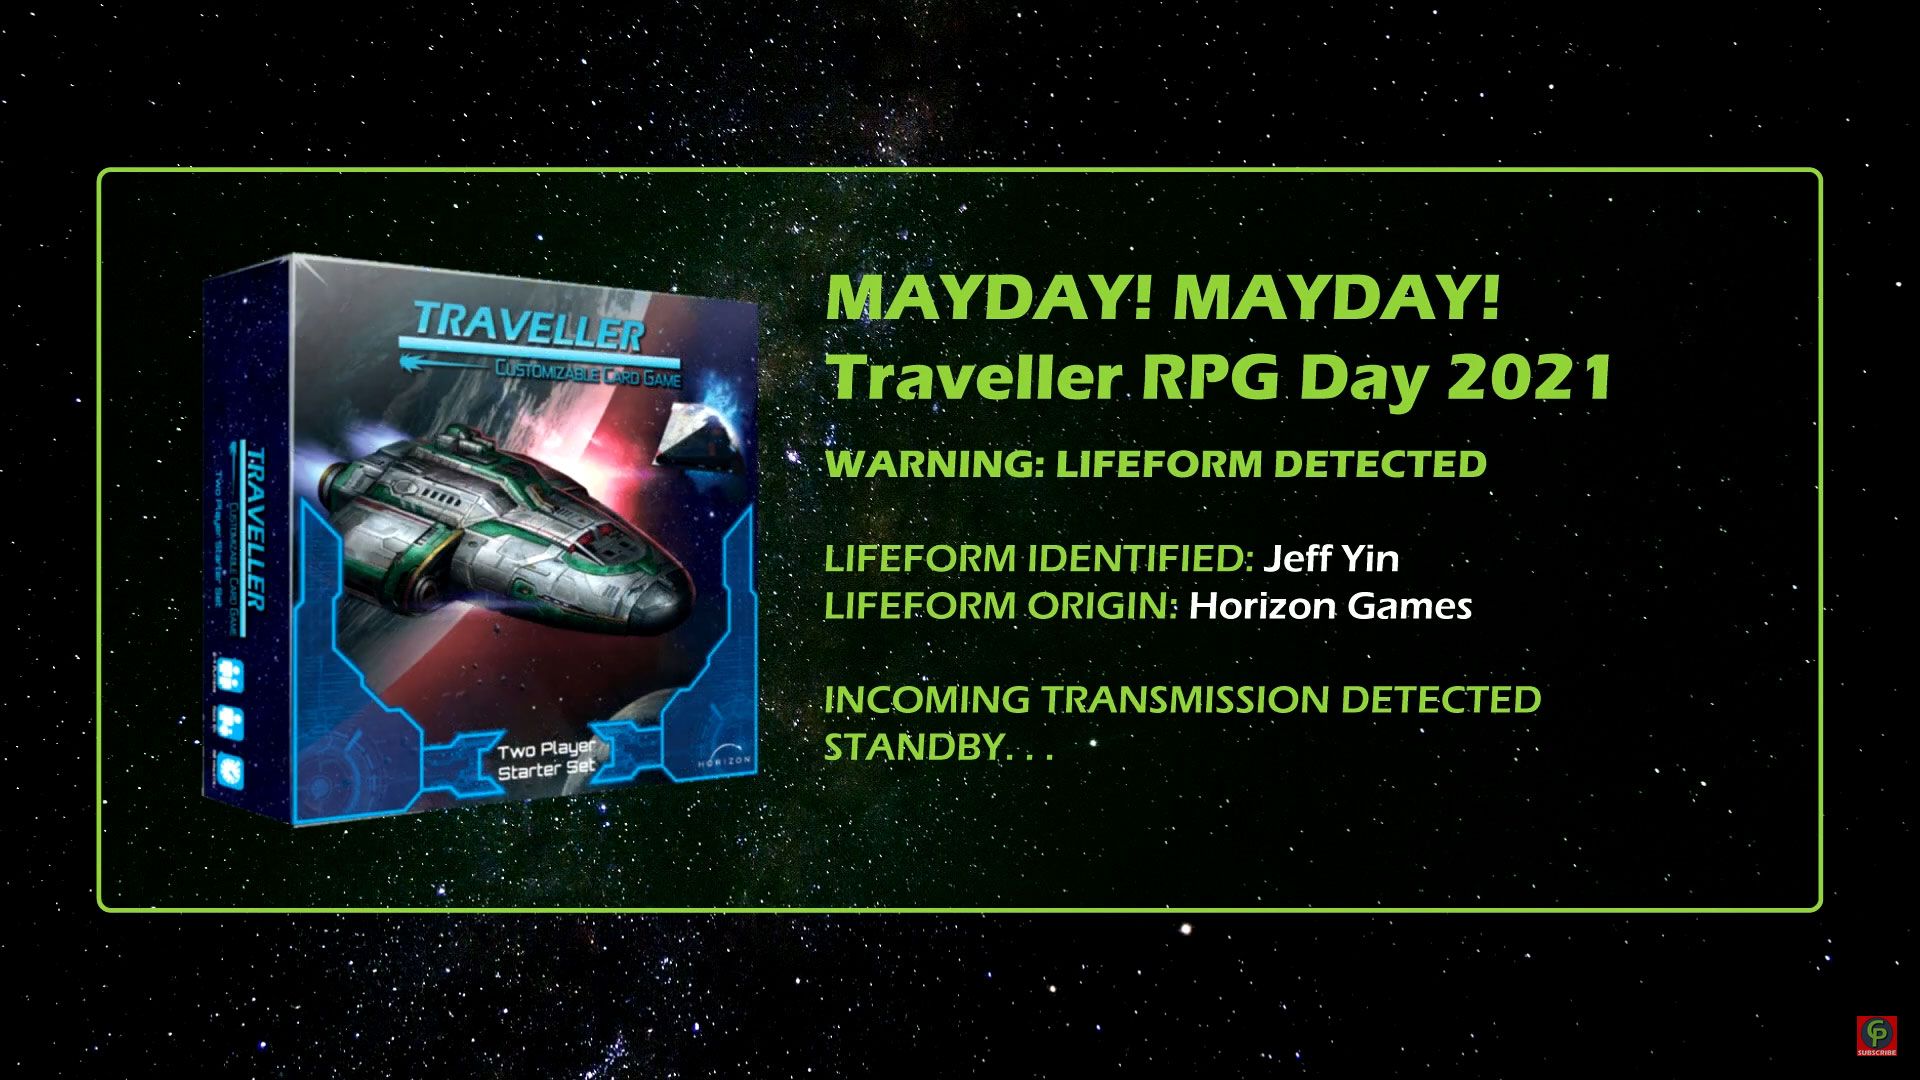 jeff yin of horizon games Interview Traveller RPG Mayday 2021 title